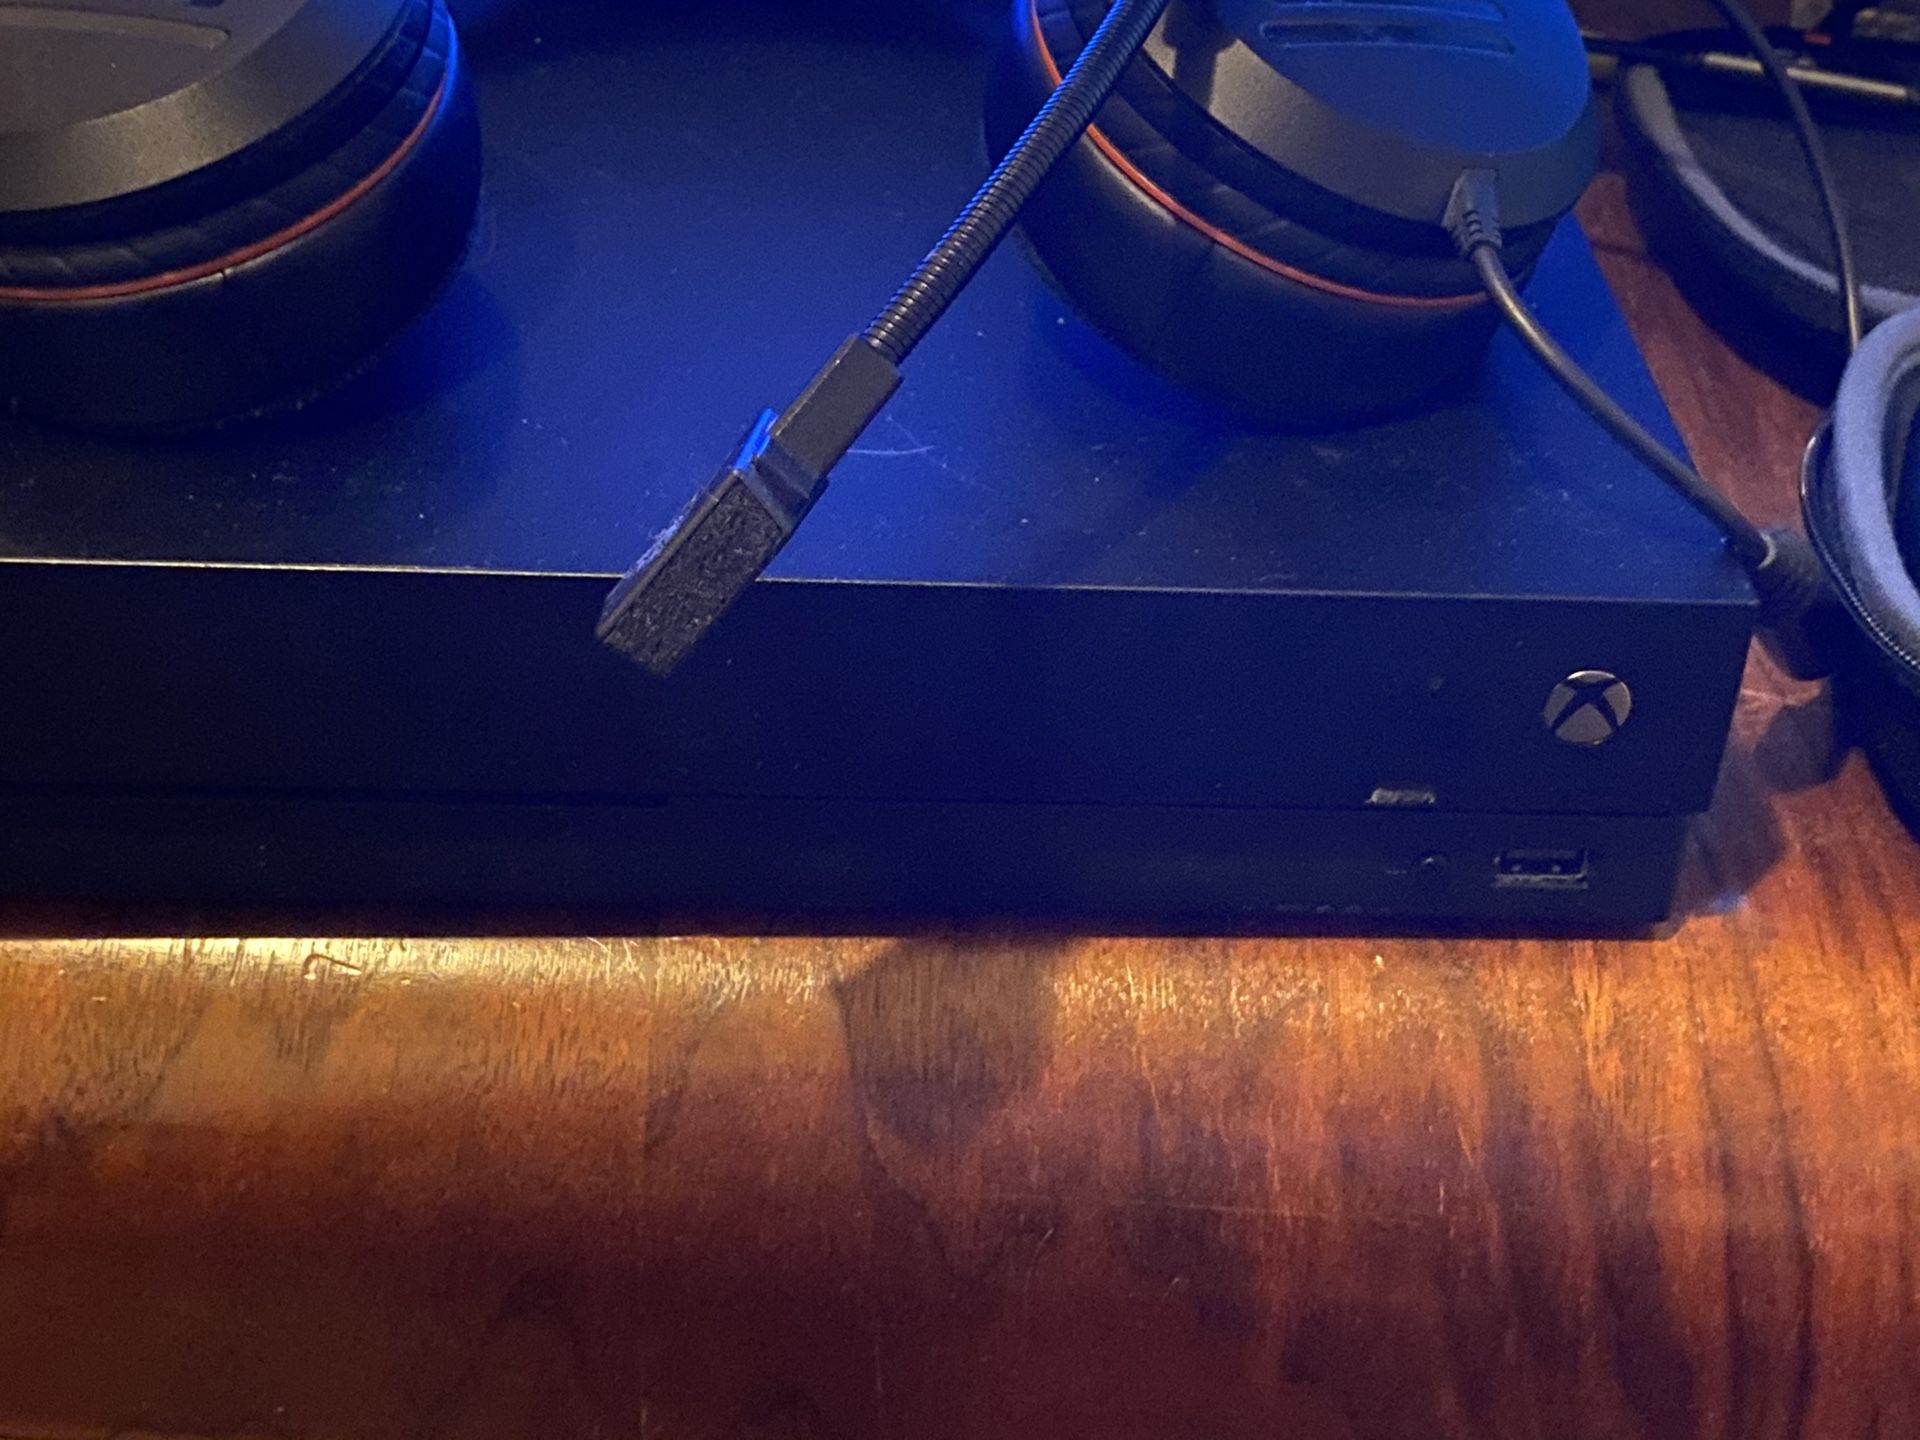 Xbox one x with controllers and headset